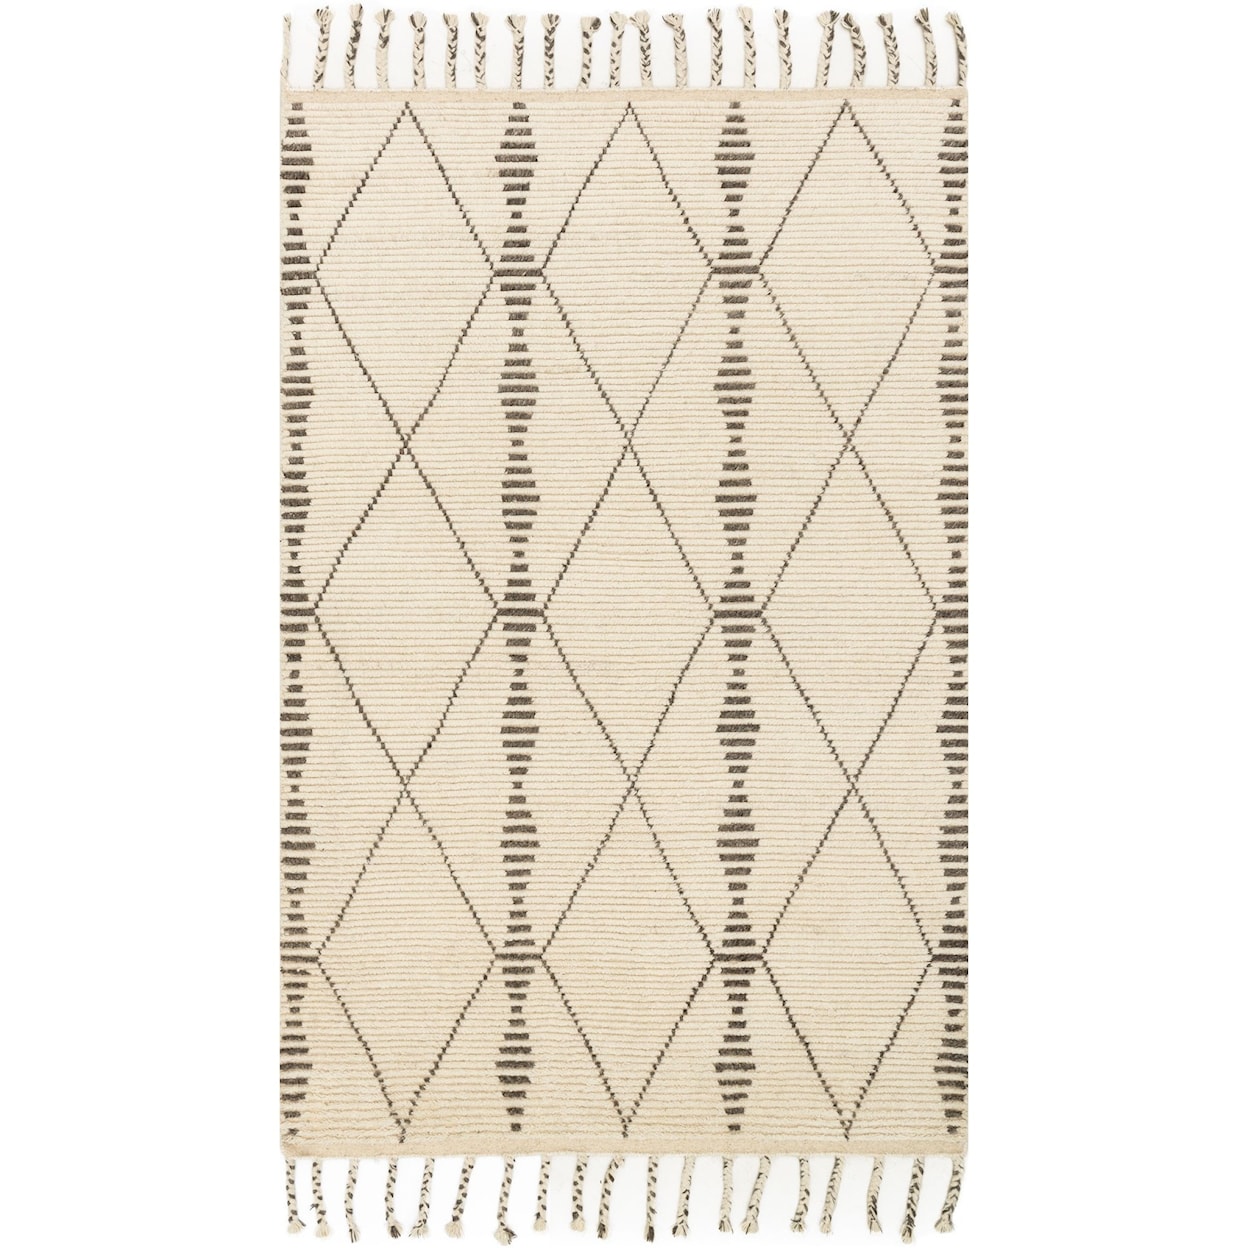 Magnolia Home by Joanna Gaines for Loloi Tulum 8' 6" x 11' 6" Rectangle Rug